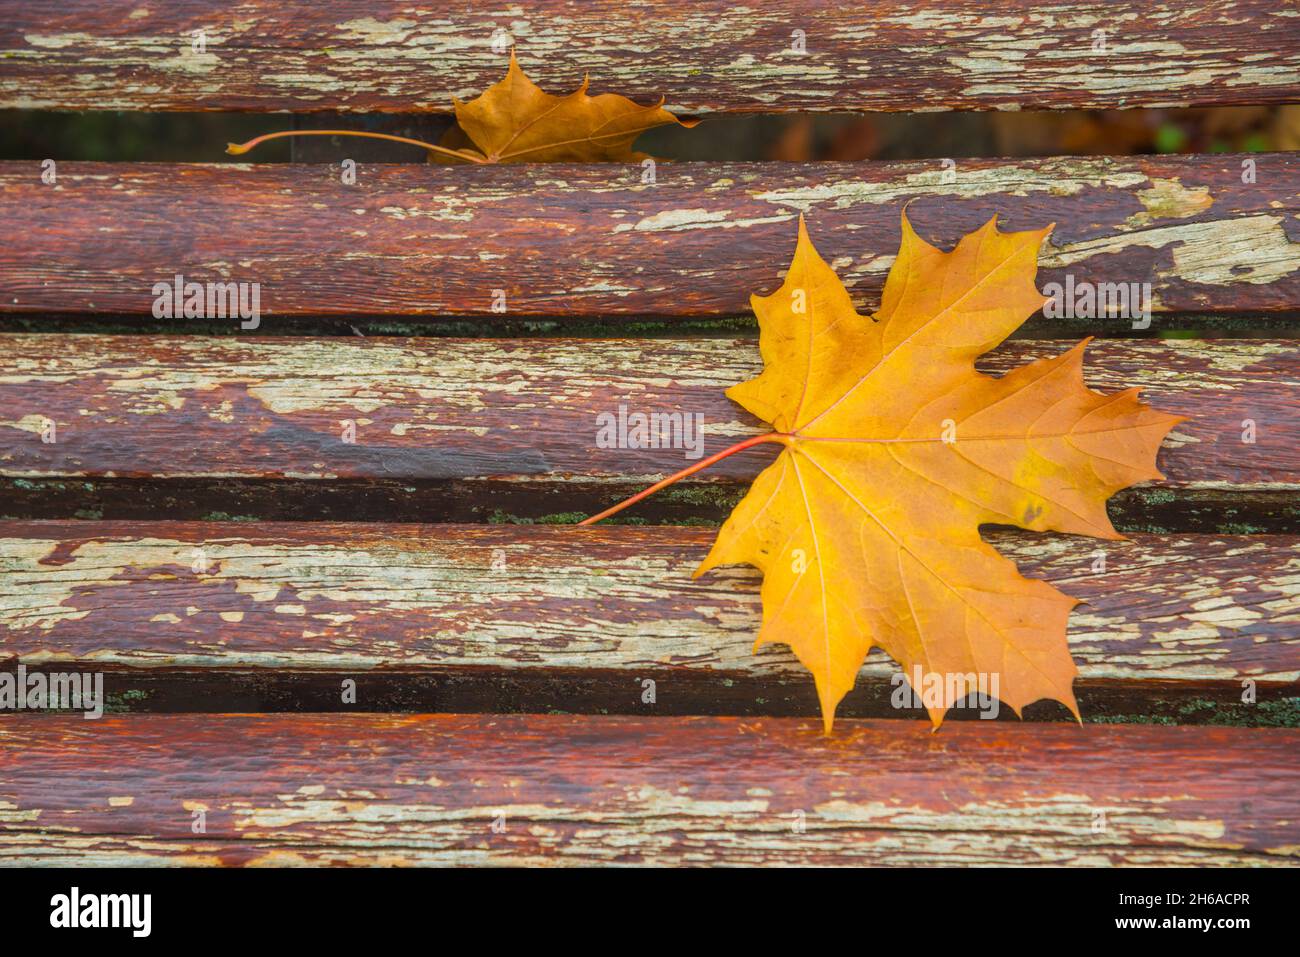 Autumn leaf on wooden bench.a Stock Photo